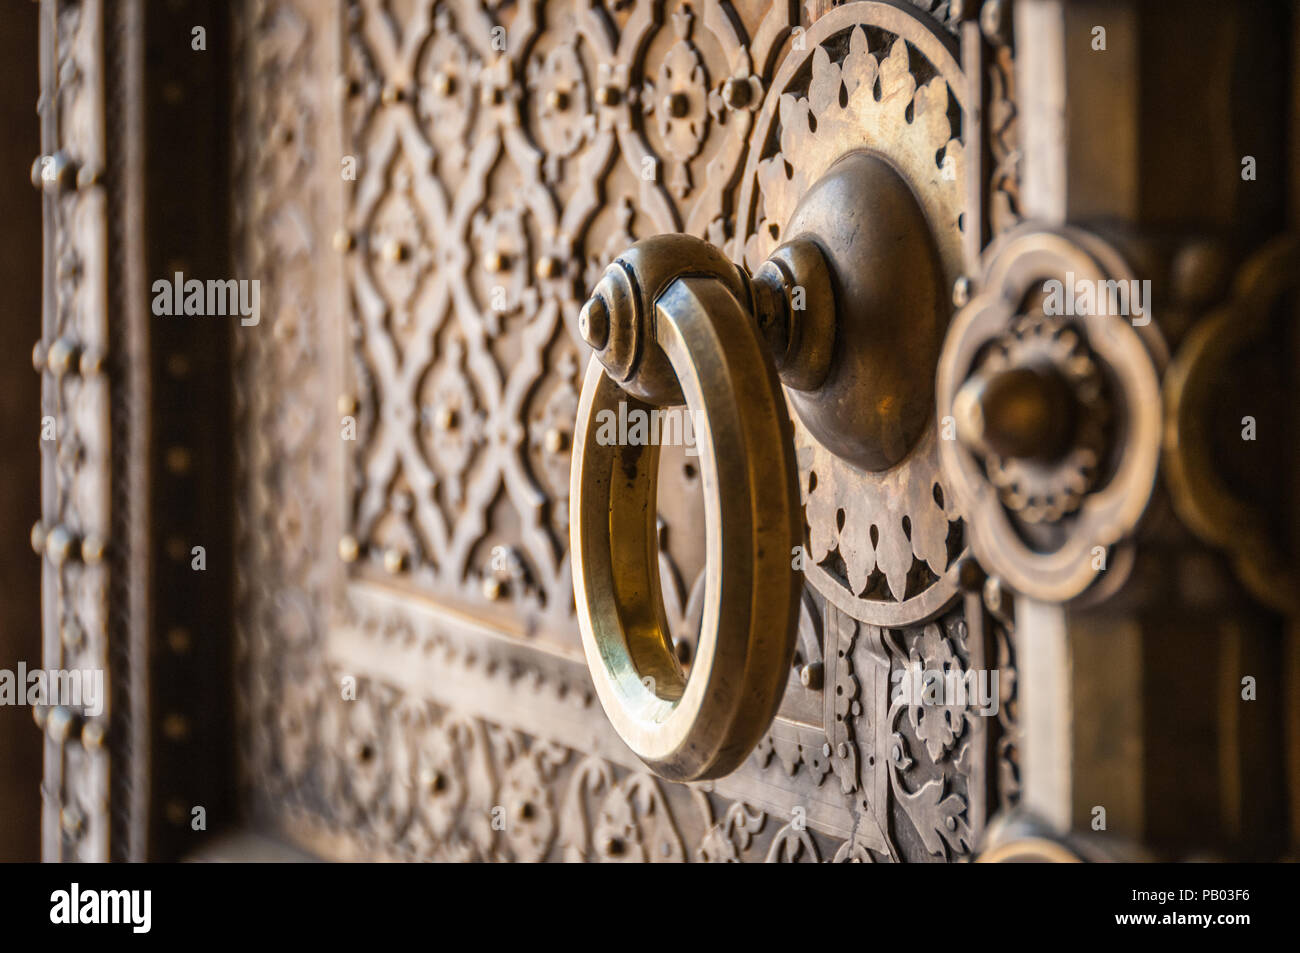 Indian ornate brass door with round handle Stock Photo